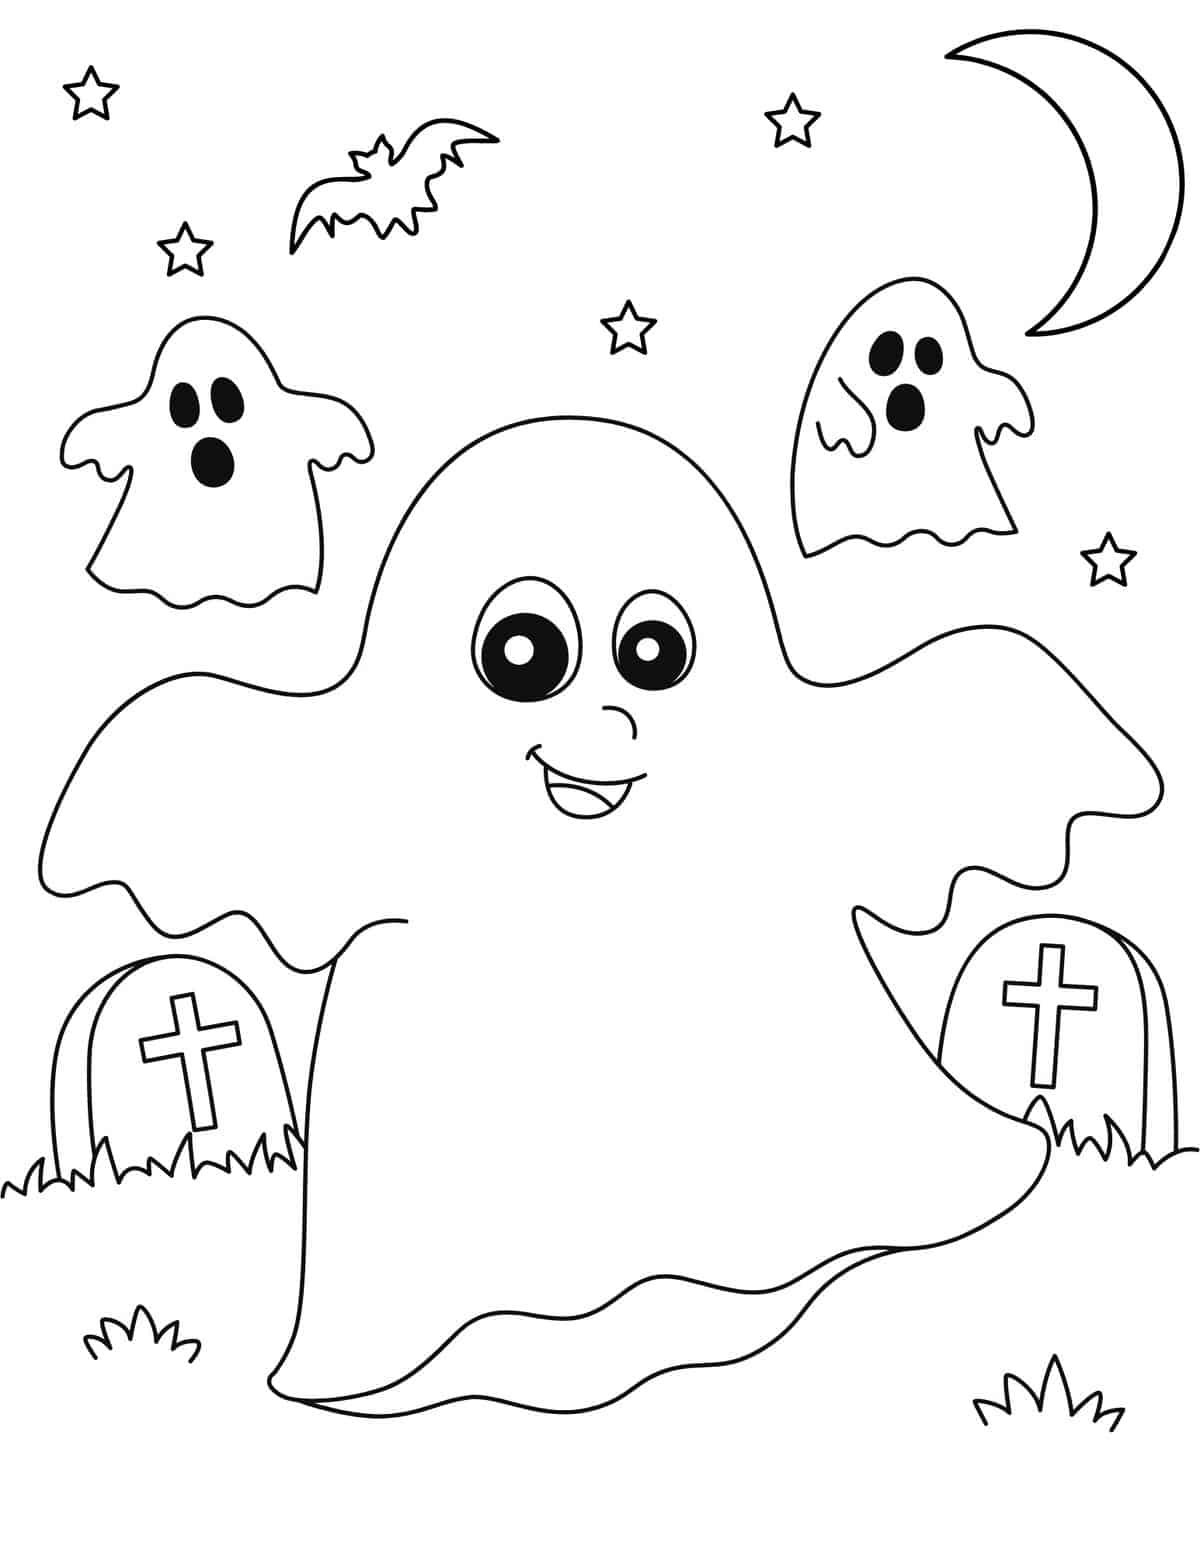 ghosts in the graveyard coloring halloween